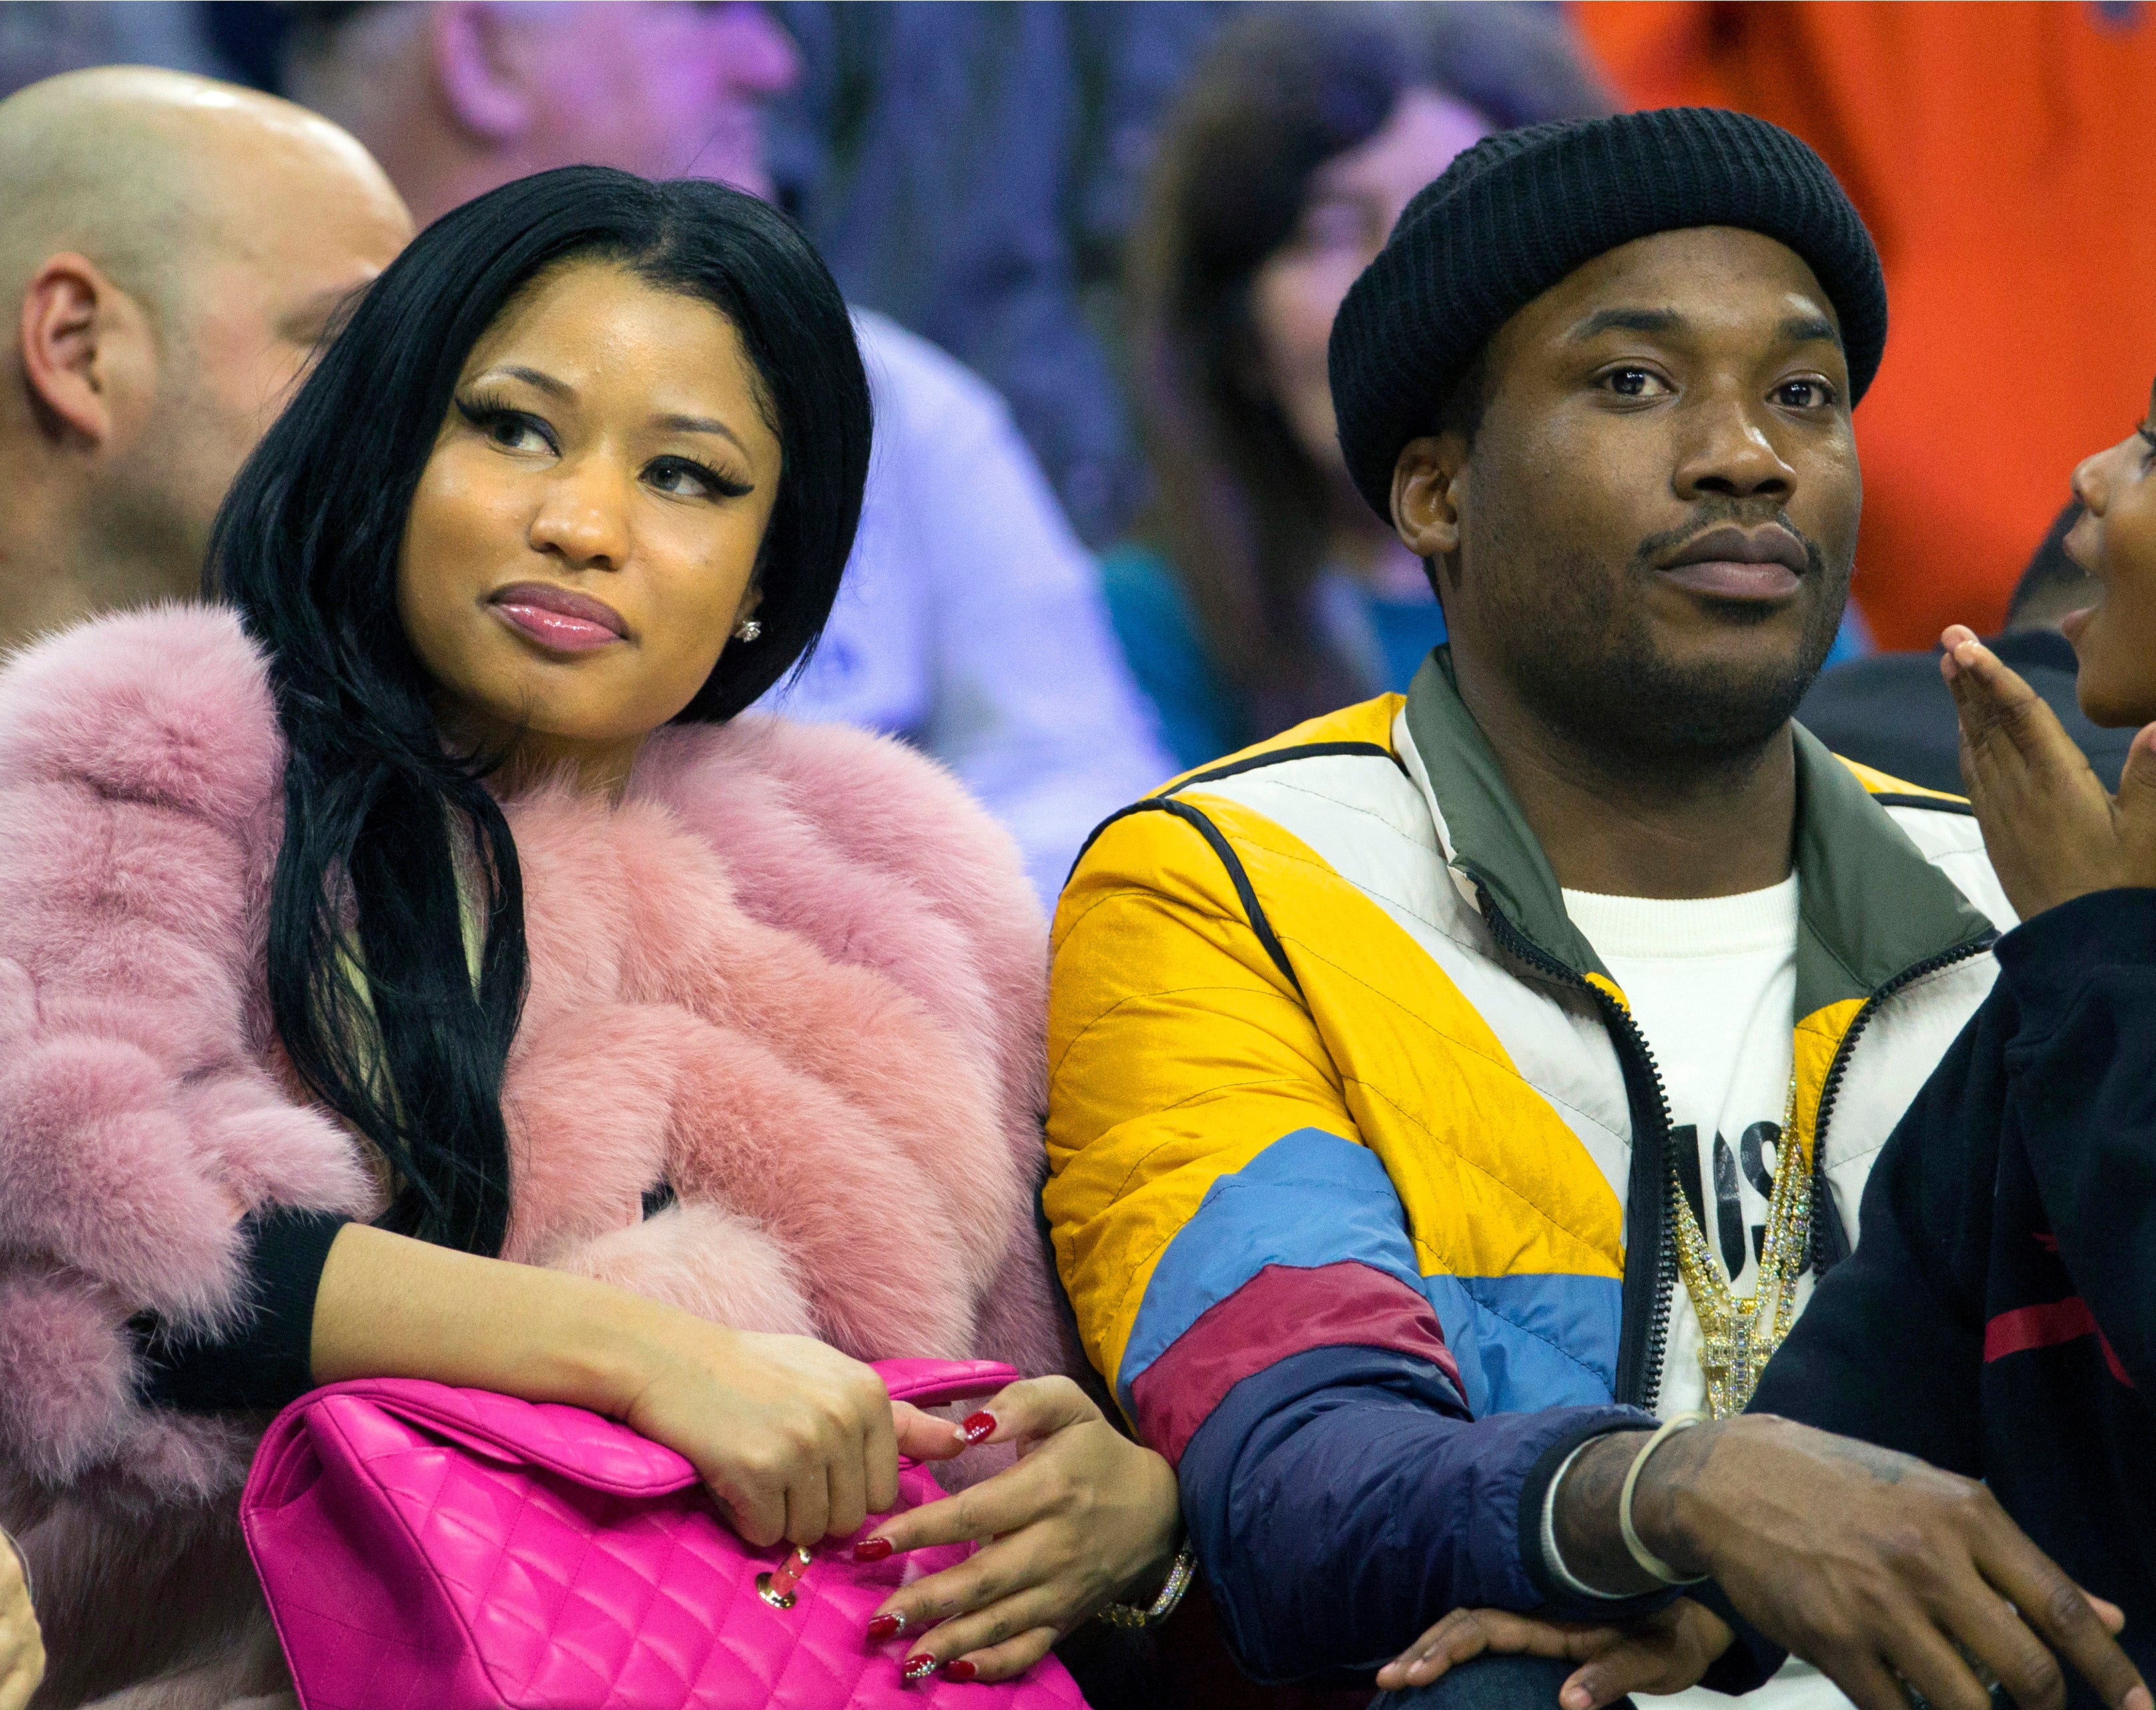 Meek Mill Outfits - Iconic Celebrity Outfits